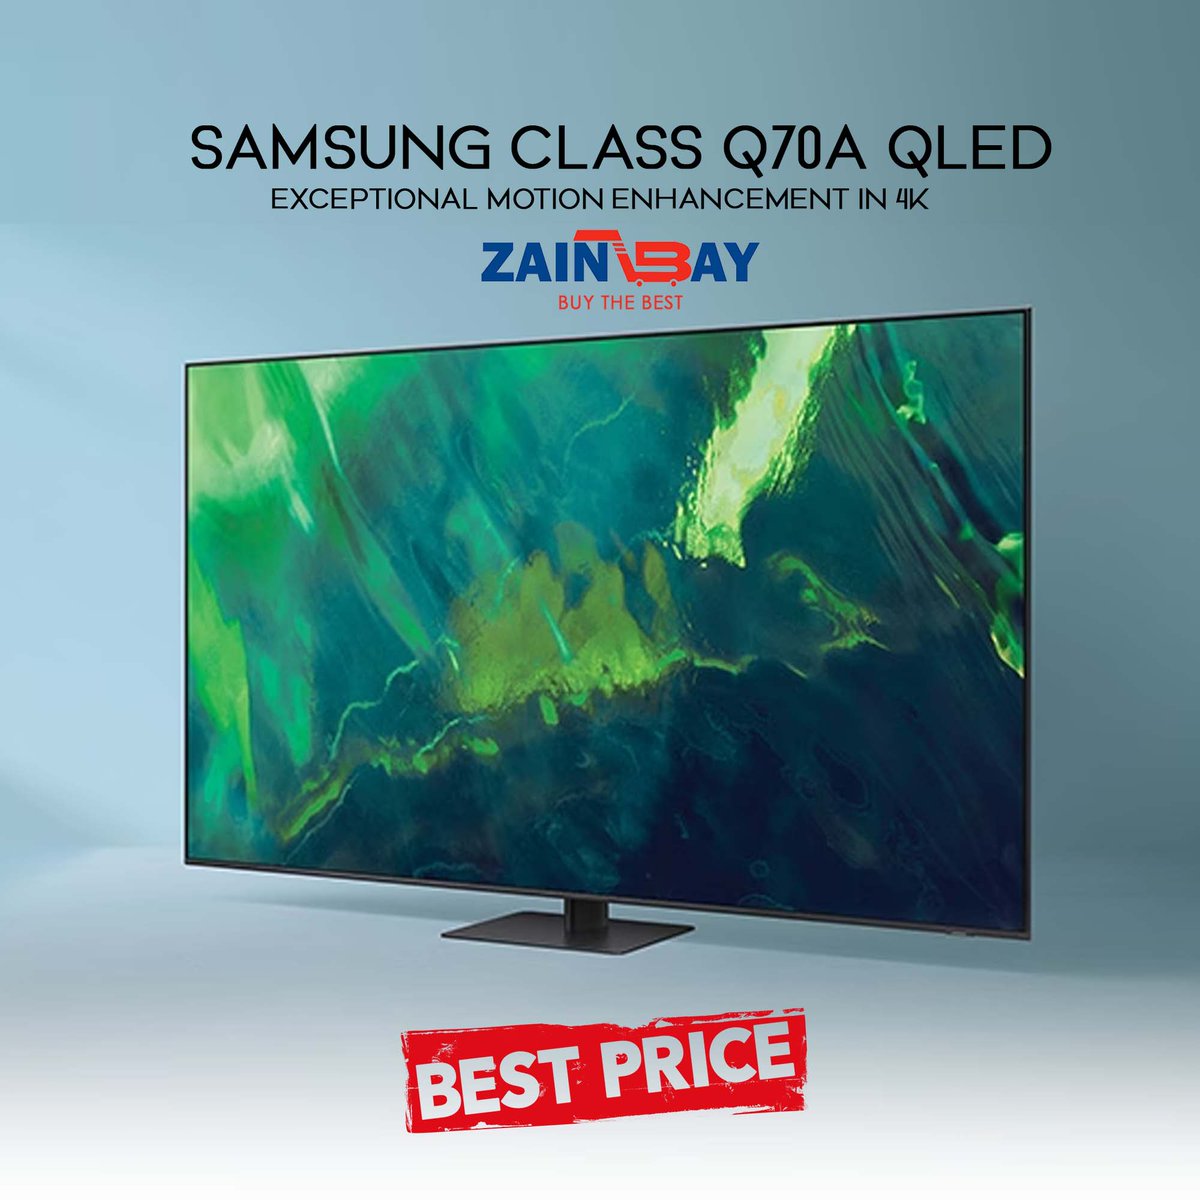 Samsung Class Q70A QLED for Exceptional Motion Enhancement in 4K. Use Promocode FIRST01 for your First Purchase to get Amazing Discounts.
To Know More Visit: zainbay.com

#Samsung #SamsungTV #SamsungQLEDTV #SamsungLEDTV #samsungq70a #samsungsmarttv #SmartTV #Q70A #tv